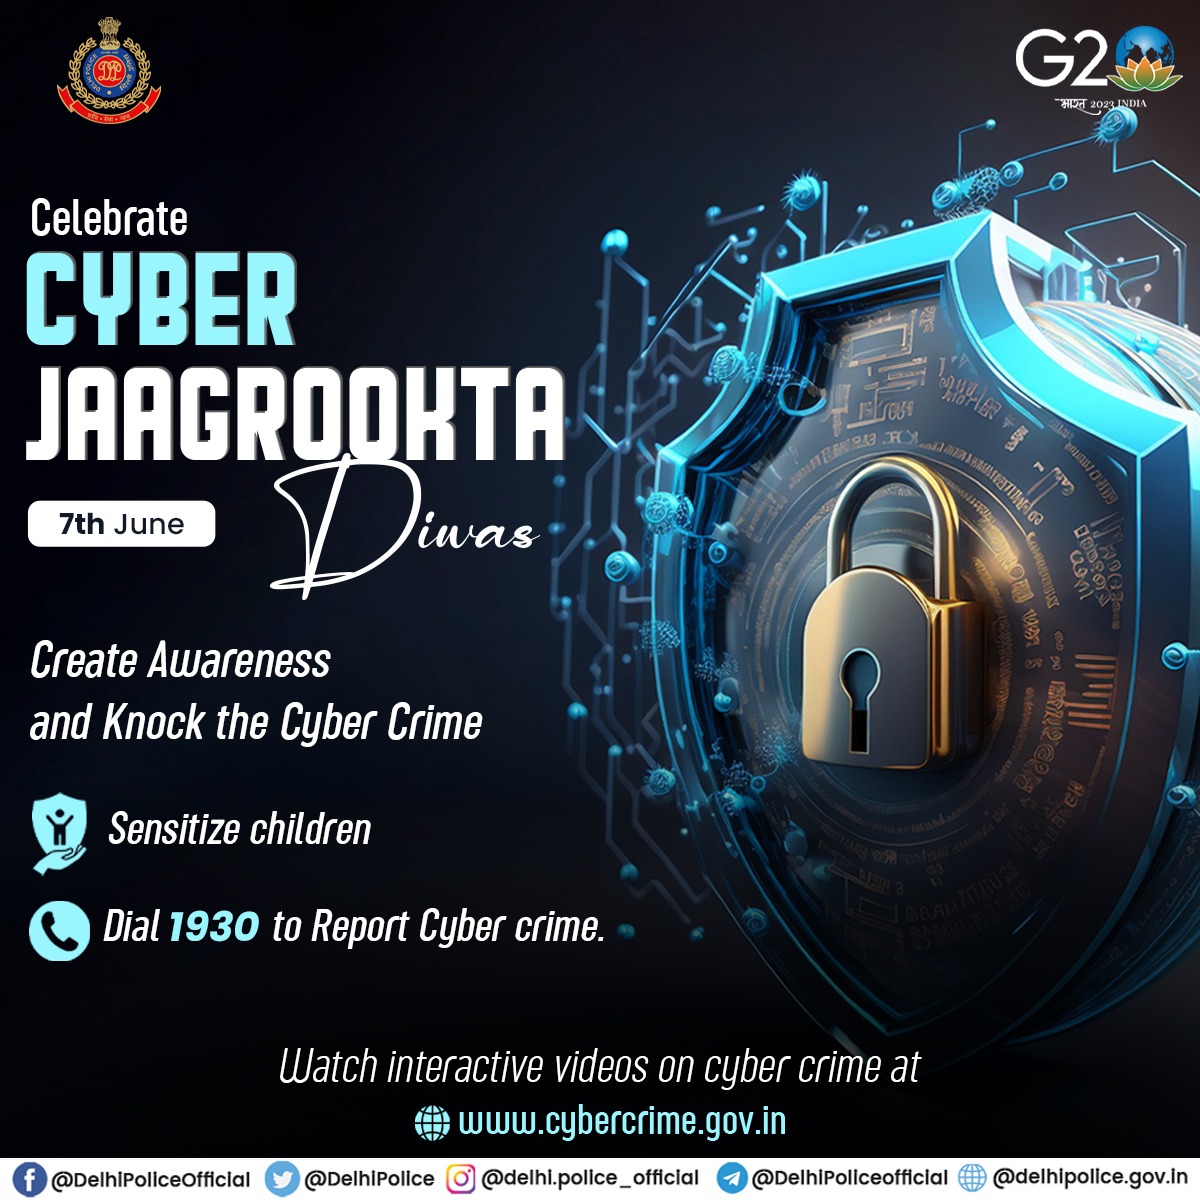 On #CyberJaagrooktaDiwas , raise awareness about cyber crimes and how to deal with it. The explosion in the number of Internet users has brought its own unique challenges to the existing cybercrime problems. Only with widespread awareness it can be knocked down.

#cyberSmart